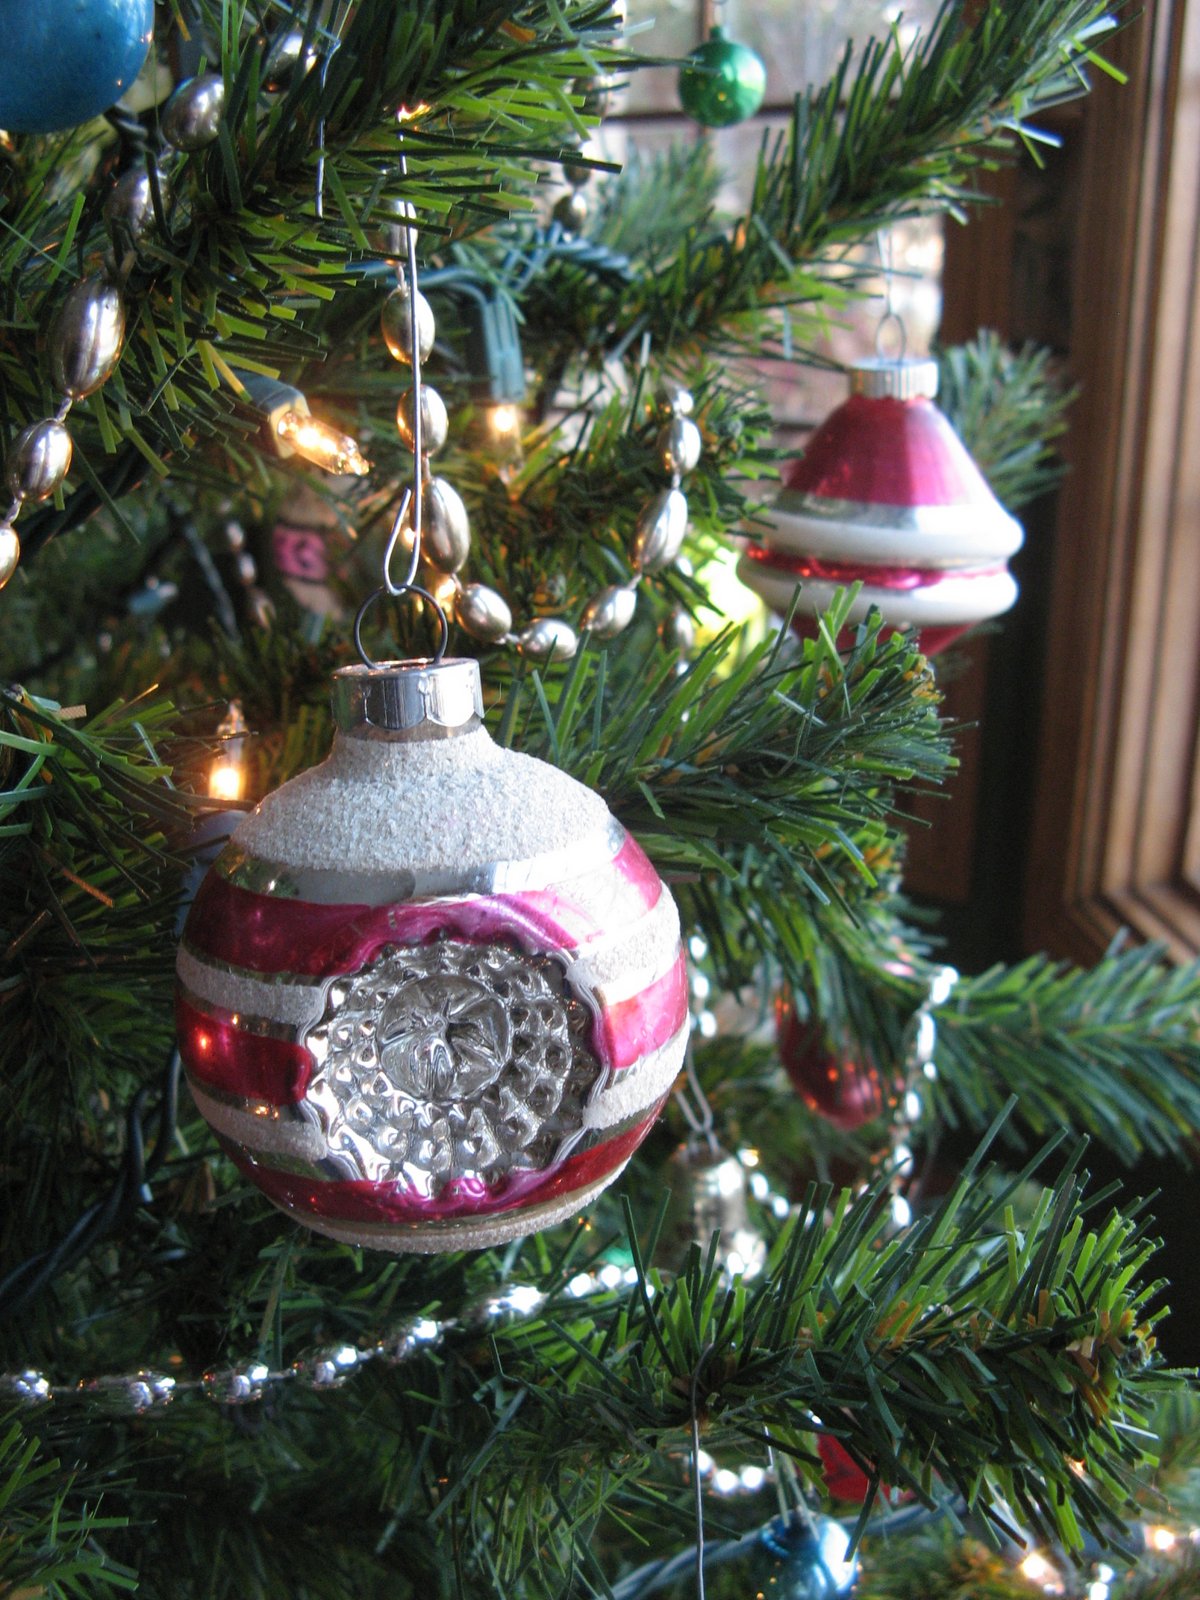 Memory Bound BLOG: Memory-Keeping Challenge: Holiday Traditions